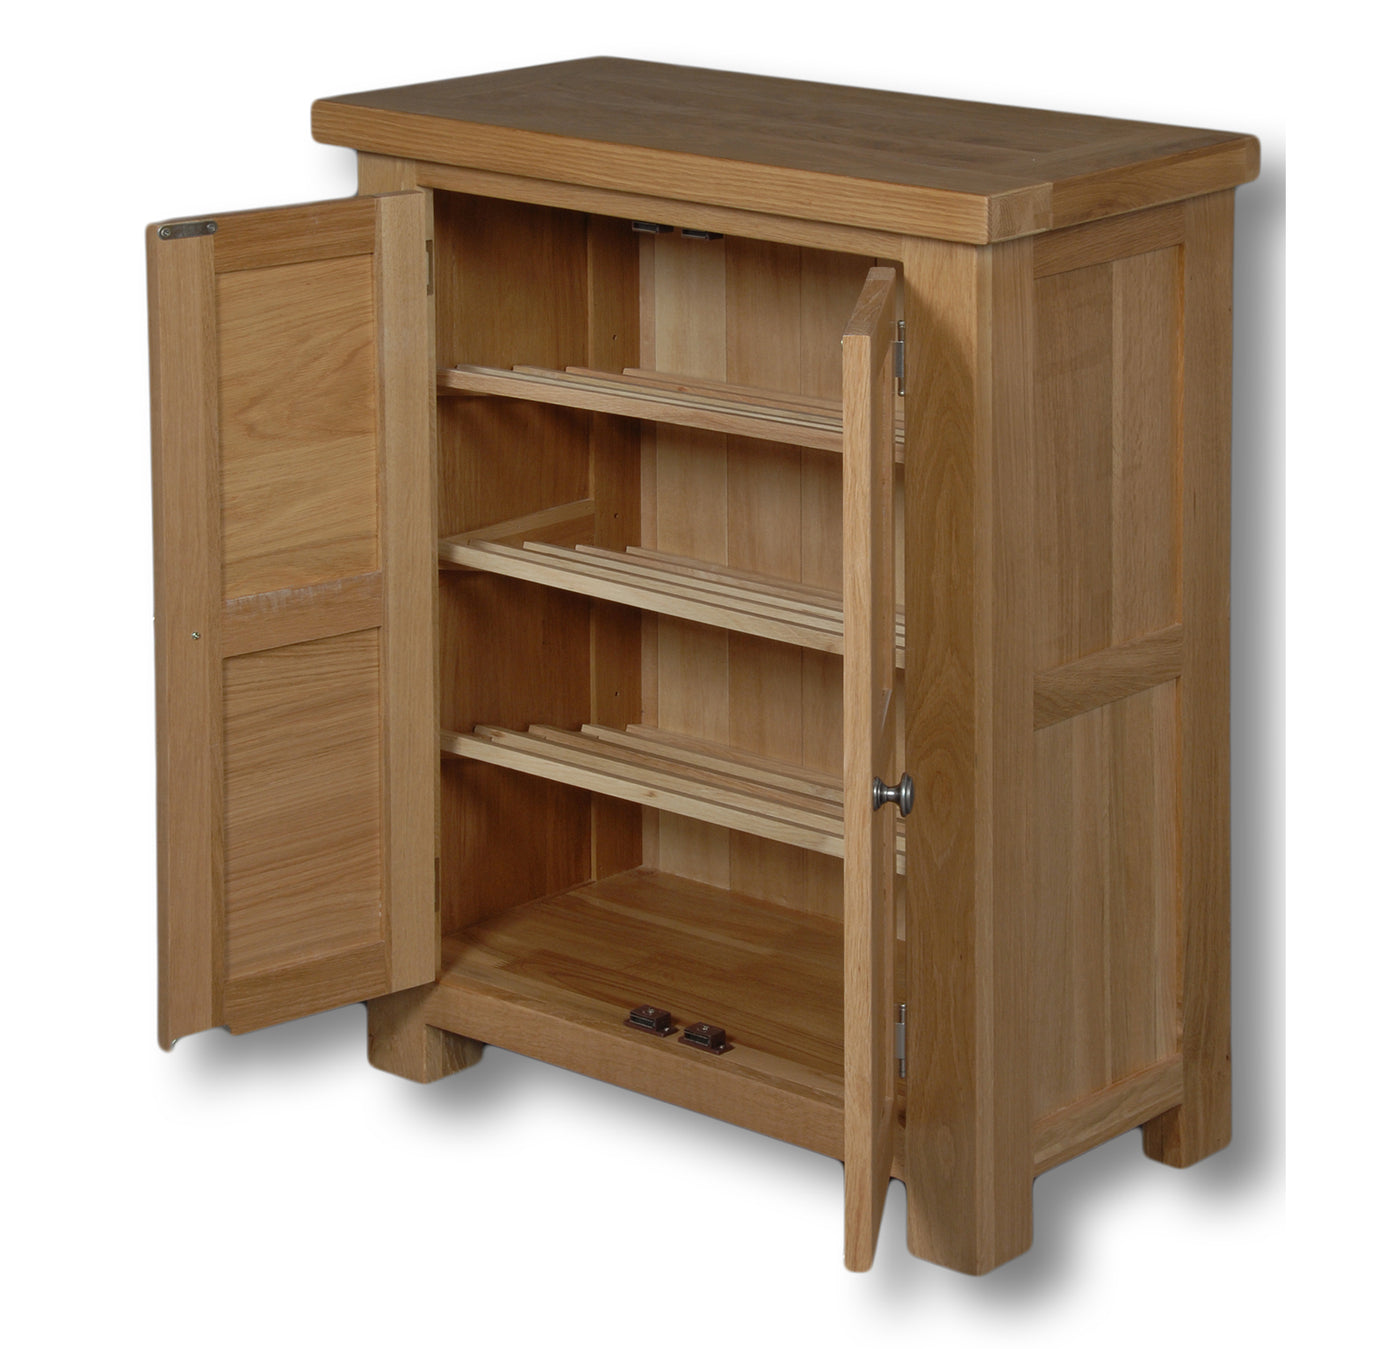 Woodstock Oak Tall Shoe Cabinet A Touch Of Furniture